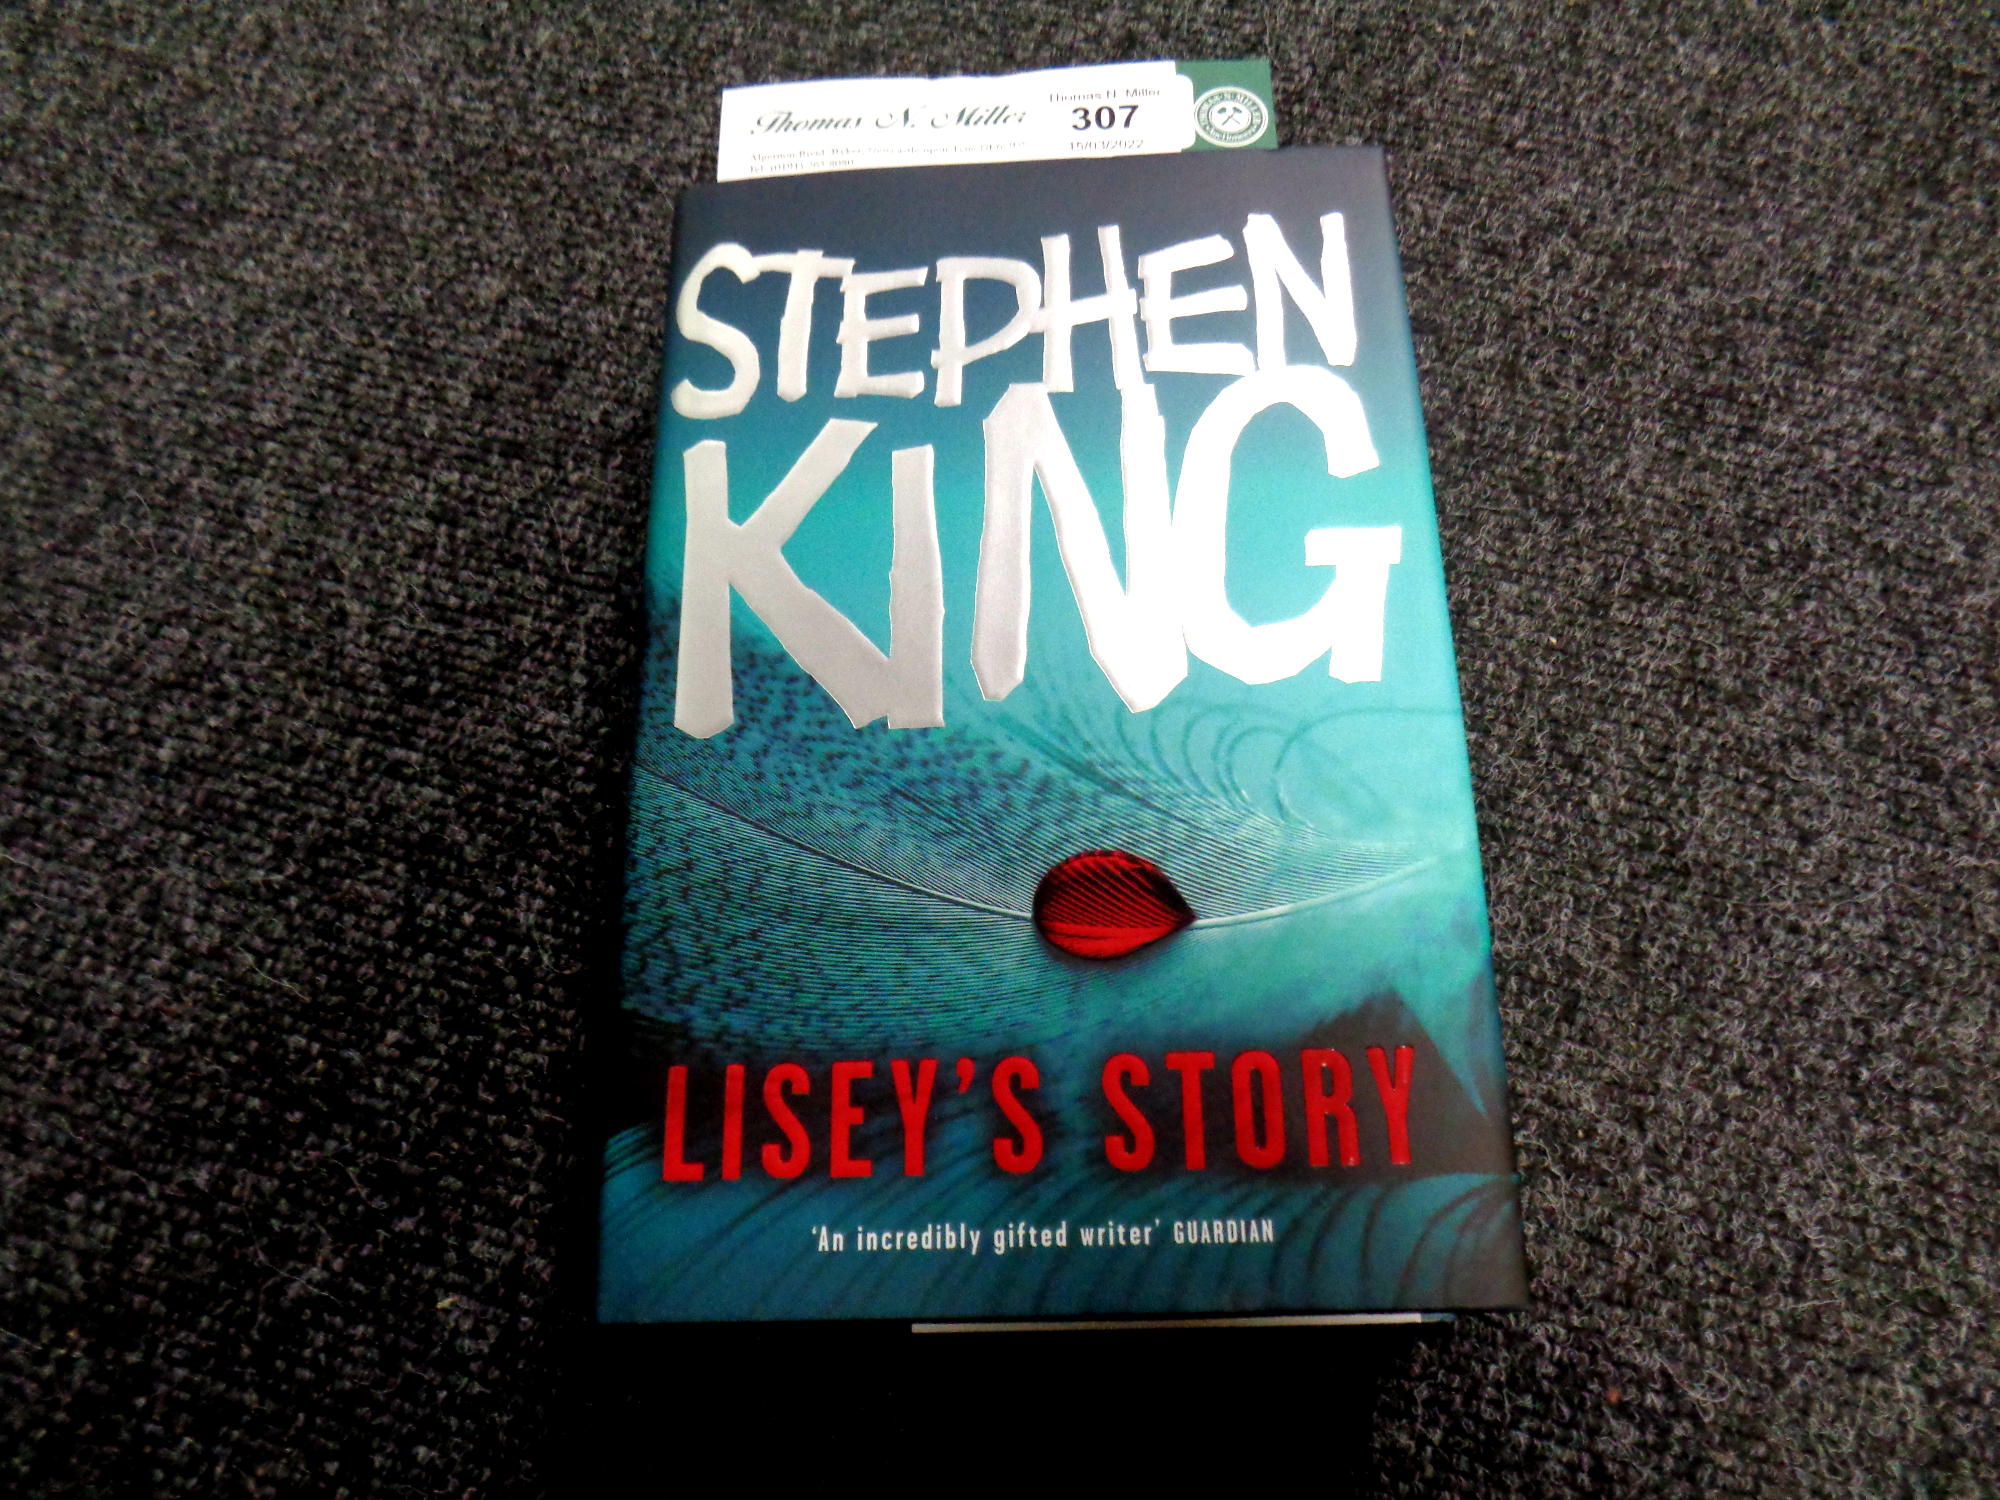 Stephen King : Lisey's Story, UK hardcover first edition, signed by King.